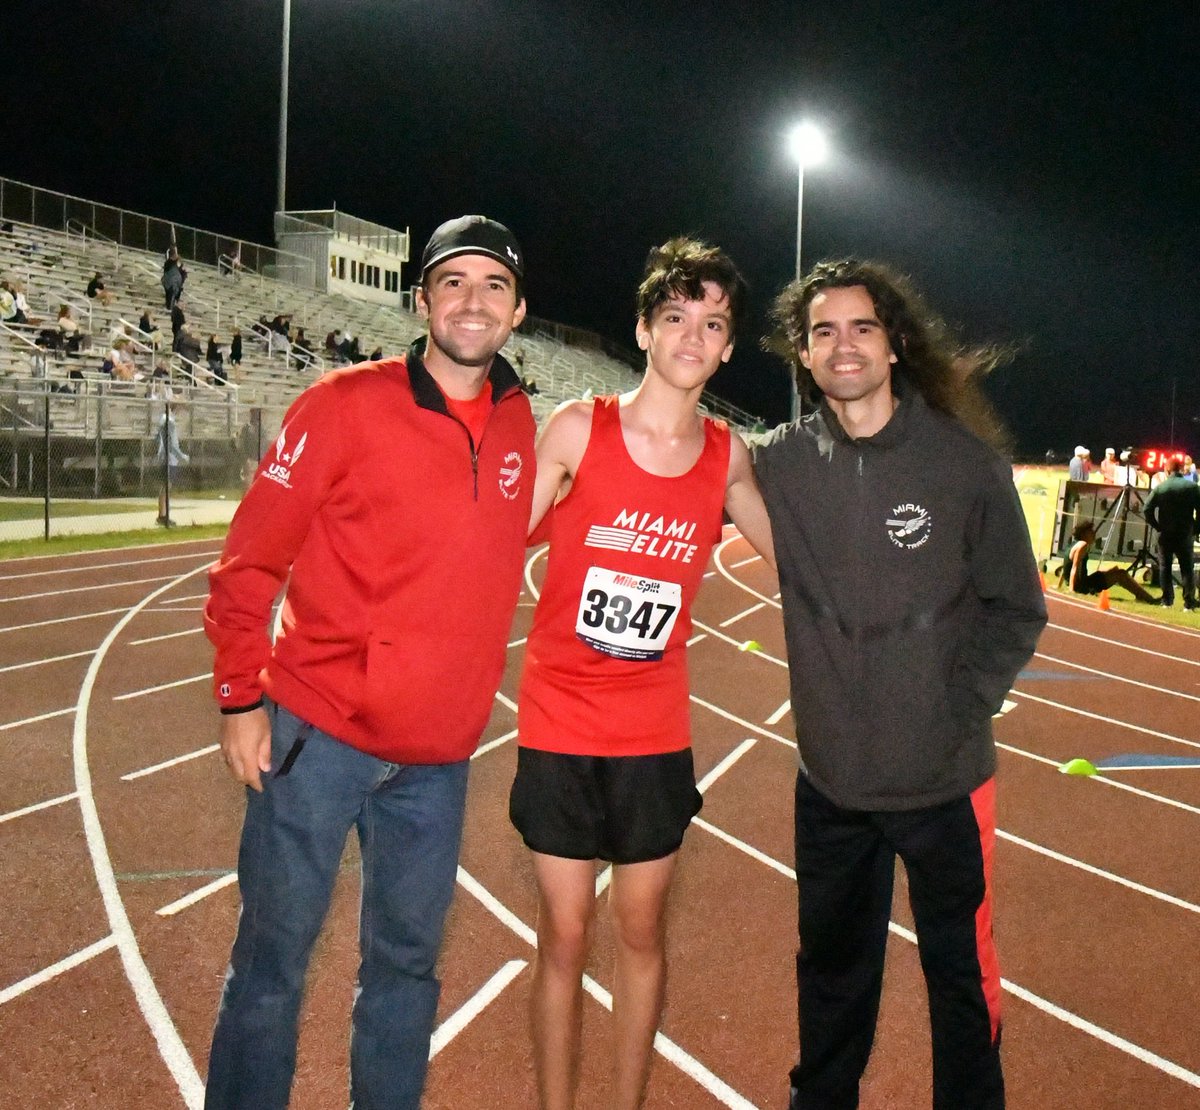 Augustin Muyl Pineda had a great race this past Saturday night. He started the season running 19:00 for 5k, then ran 18:08 earlier this month before running 17:01 in the 5000m on the track @flmilesplit PR Festival. Congratulations, Augustin! 
--
#xc #crosscountry #track #running